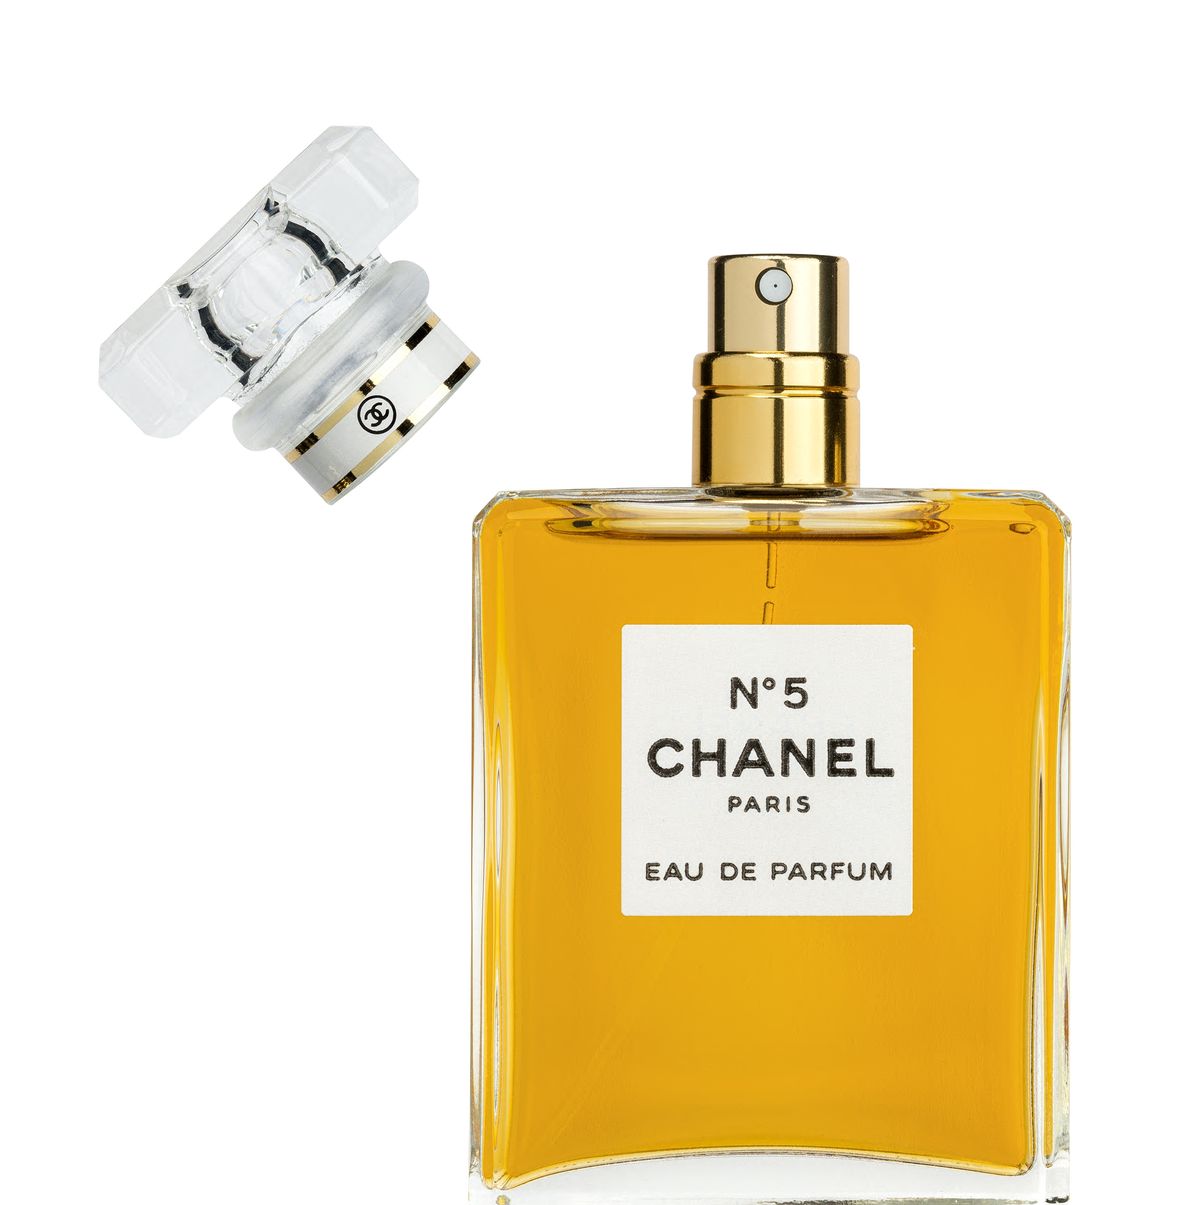 5 Things I Learned From Wearing Chanel No. 5 Every Day - Learning